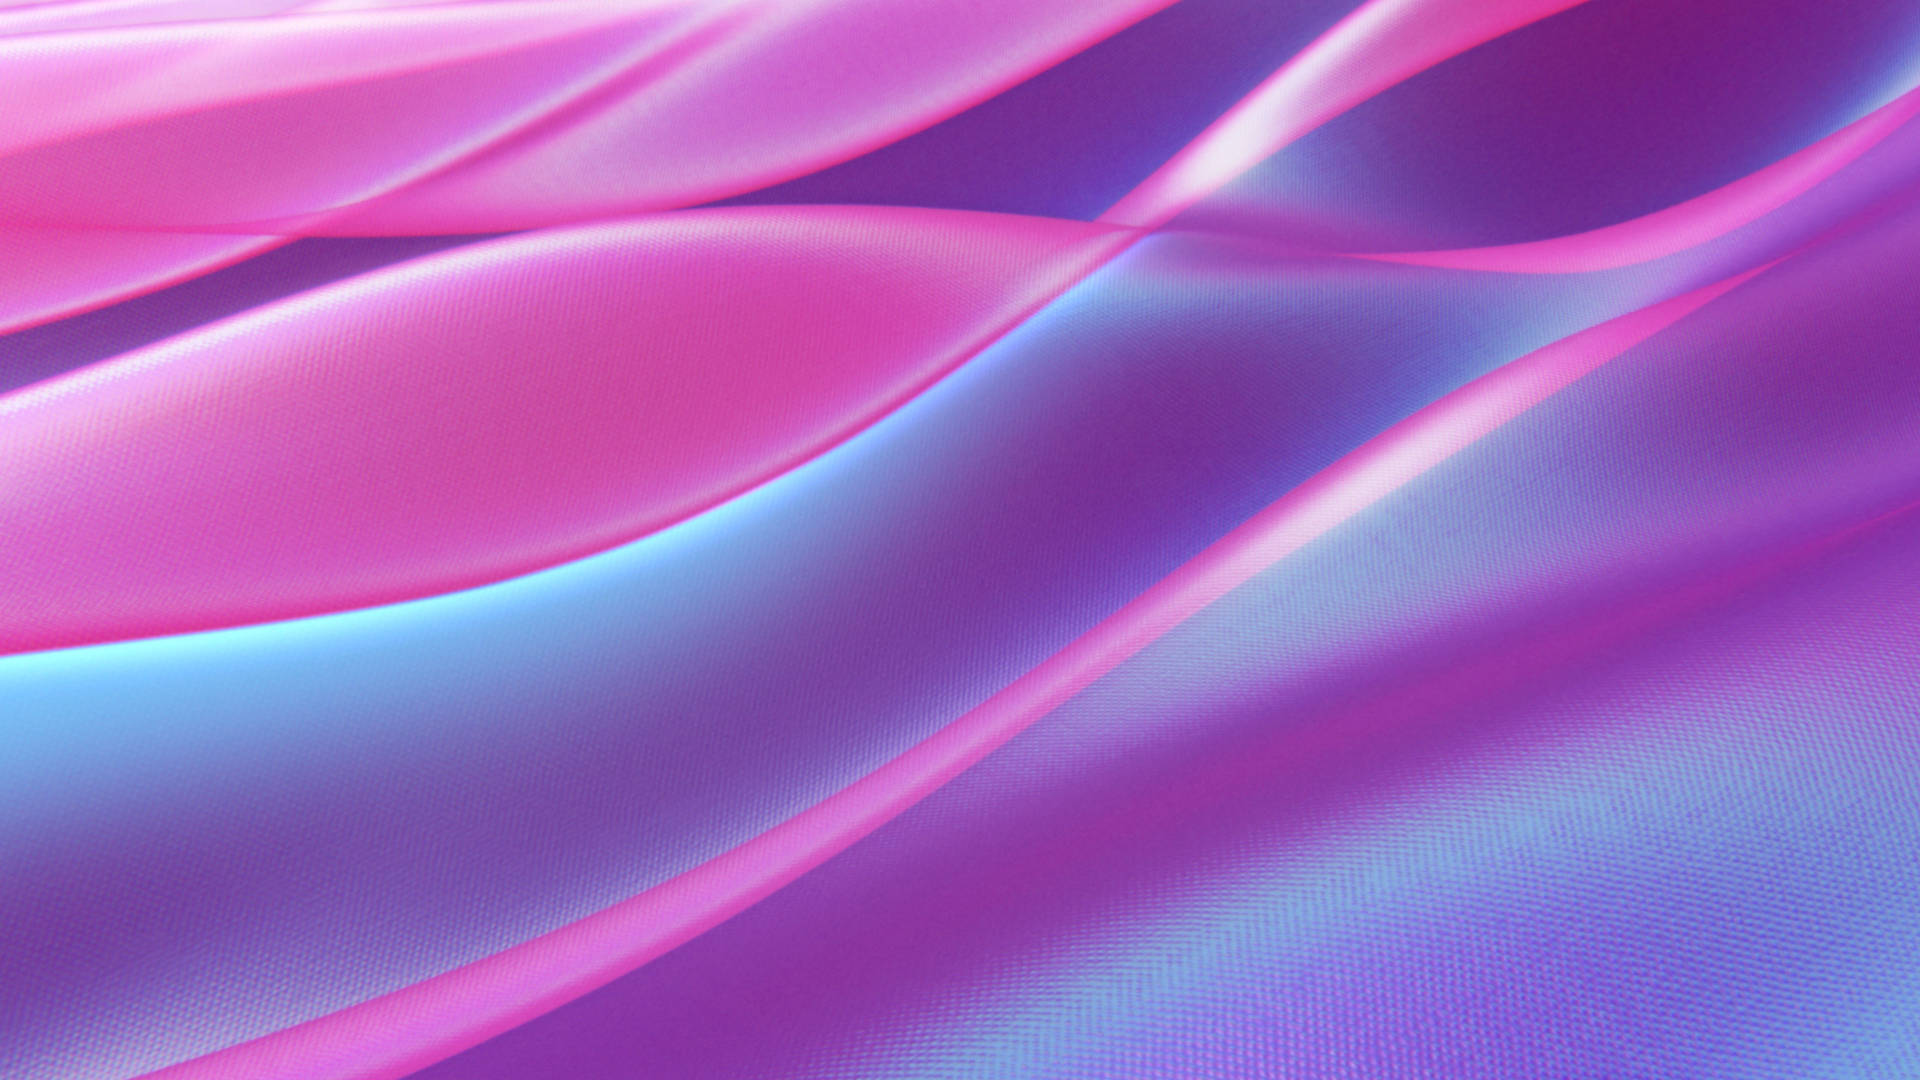 Neon Pink And Blue Waves Wallpaper